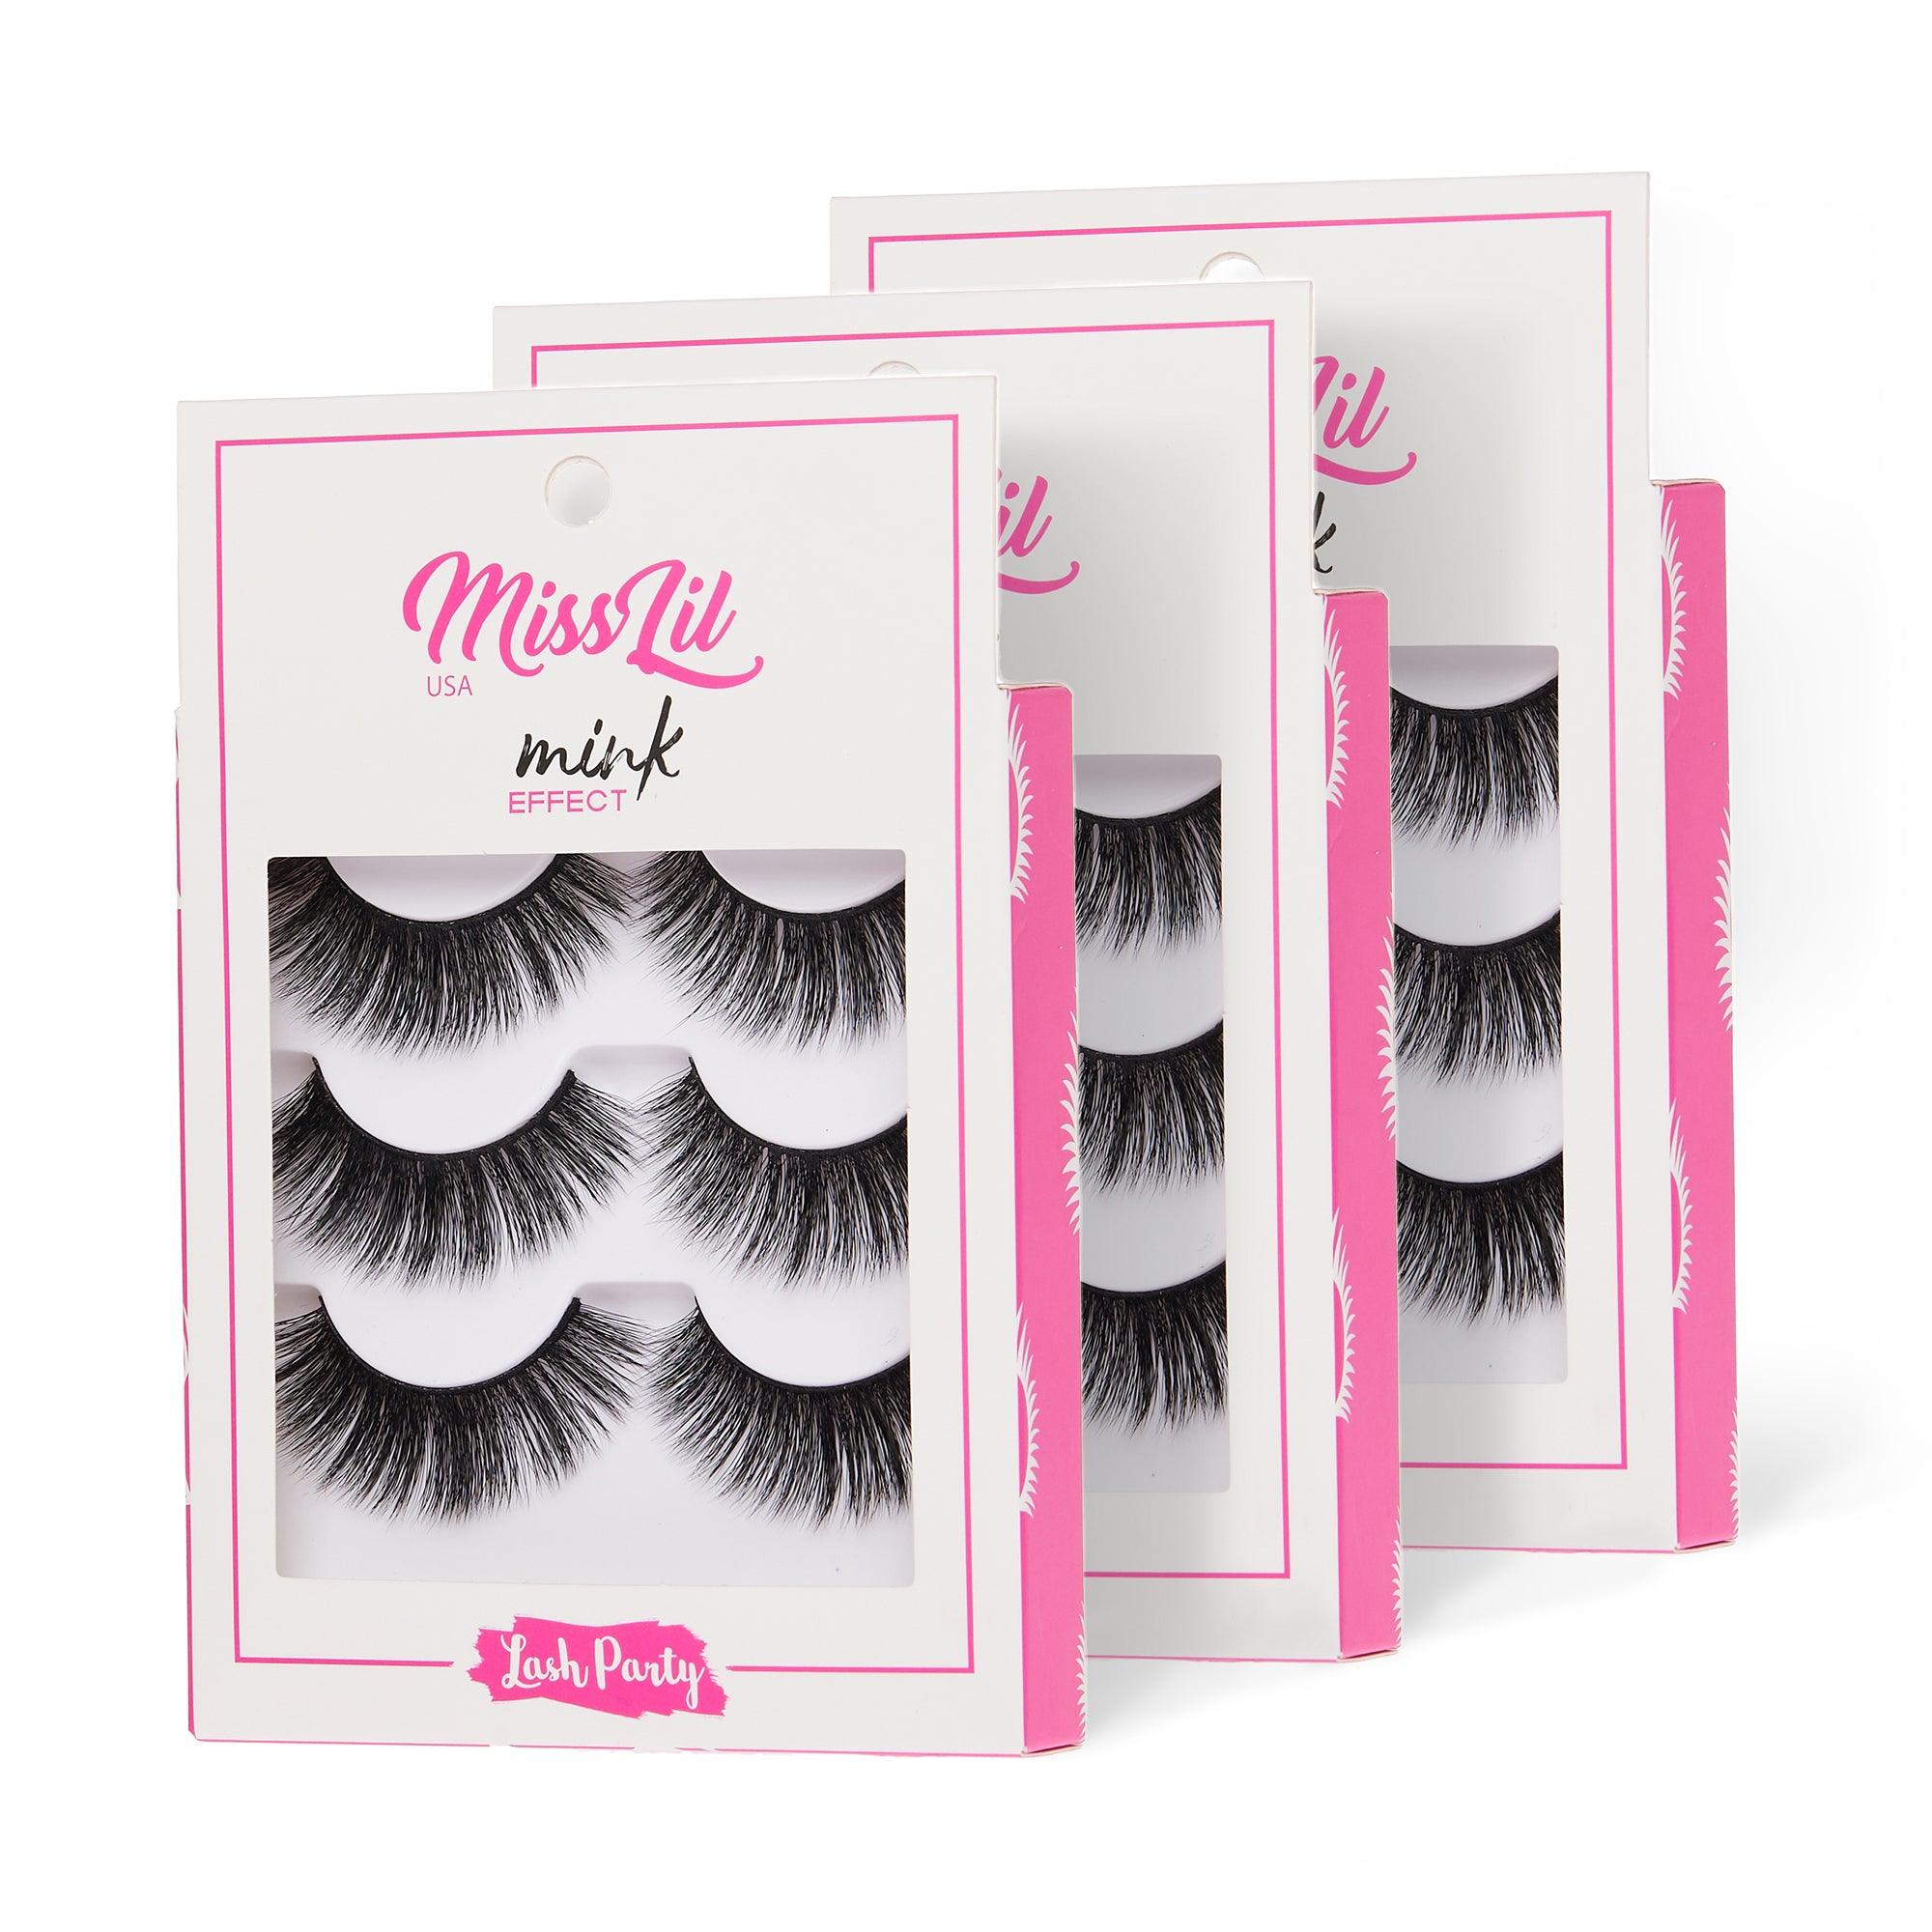 3-Pair Faux Mink Effect Eyelashes - Lash Party Collection #11 - Pack of 3